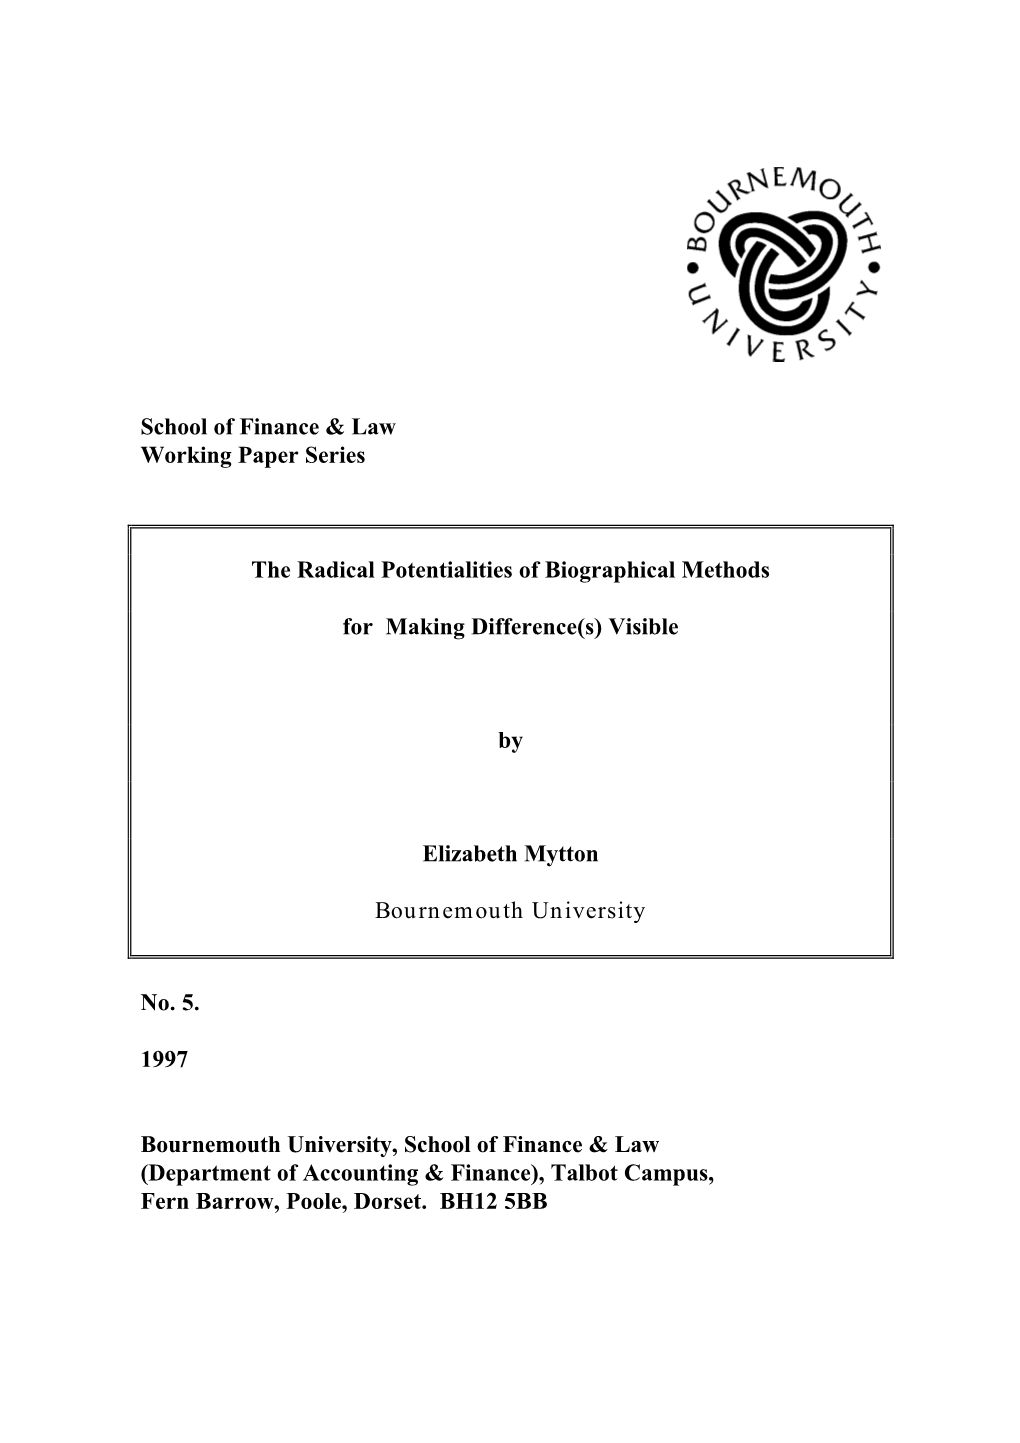 School of Finance & Law Working Paper Series the Radical